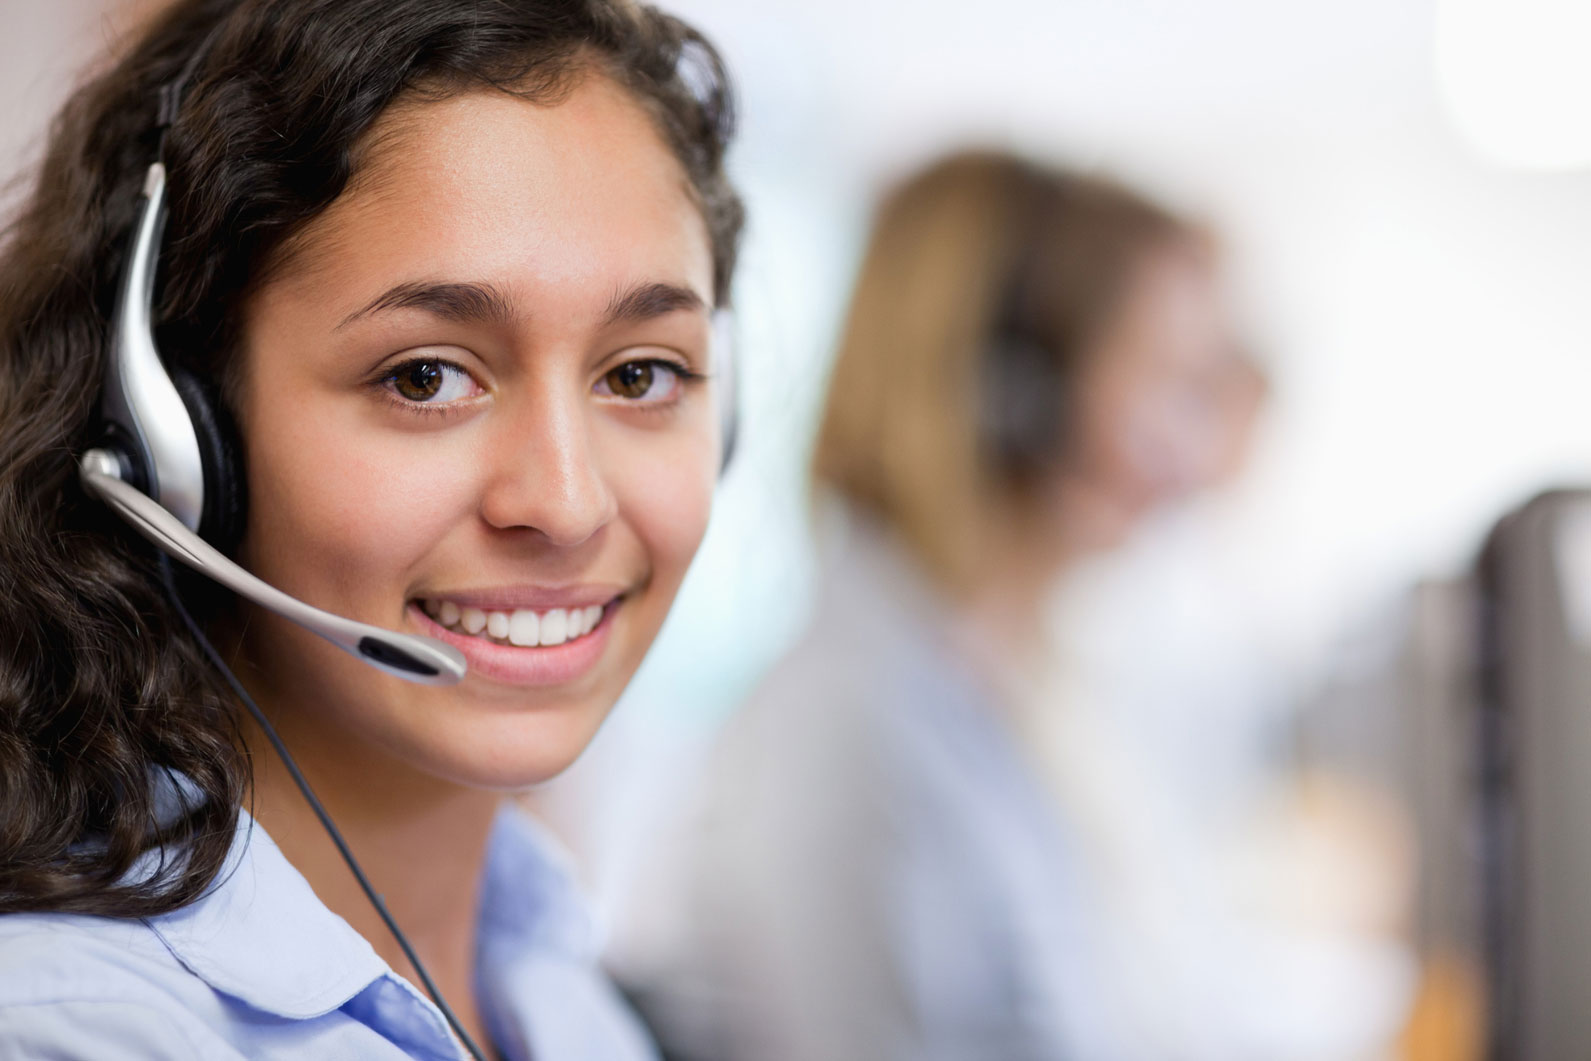 24/7 answering service